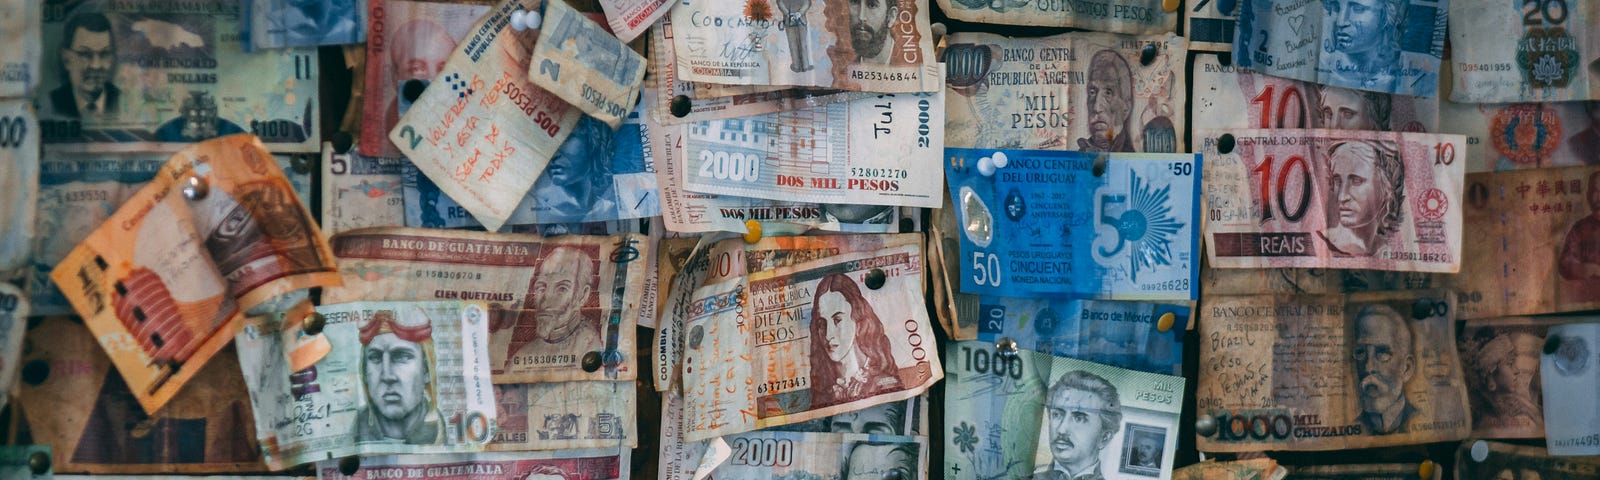 Various currency notes pinned on a wall